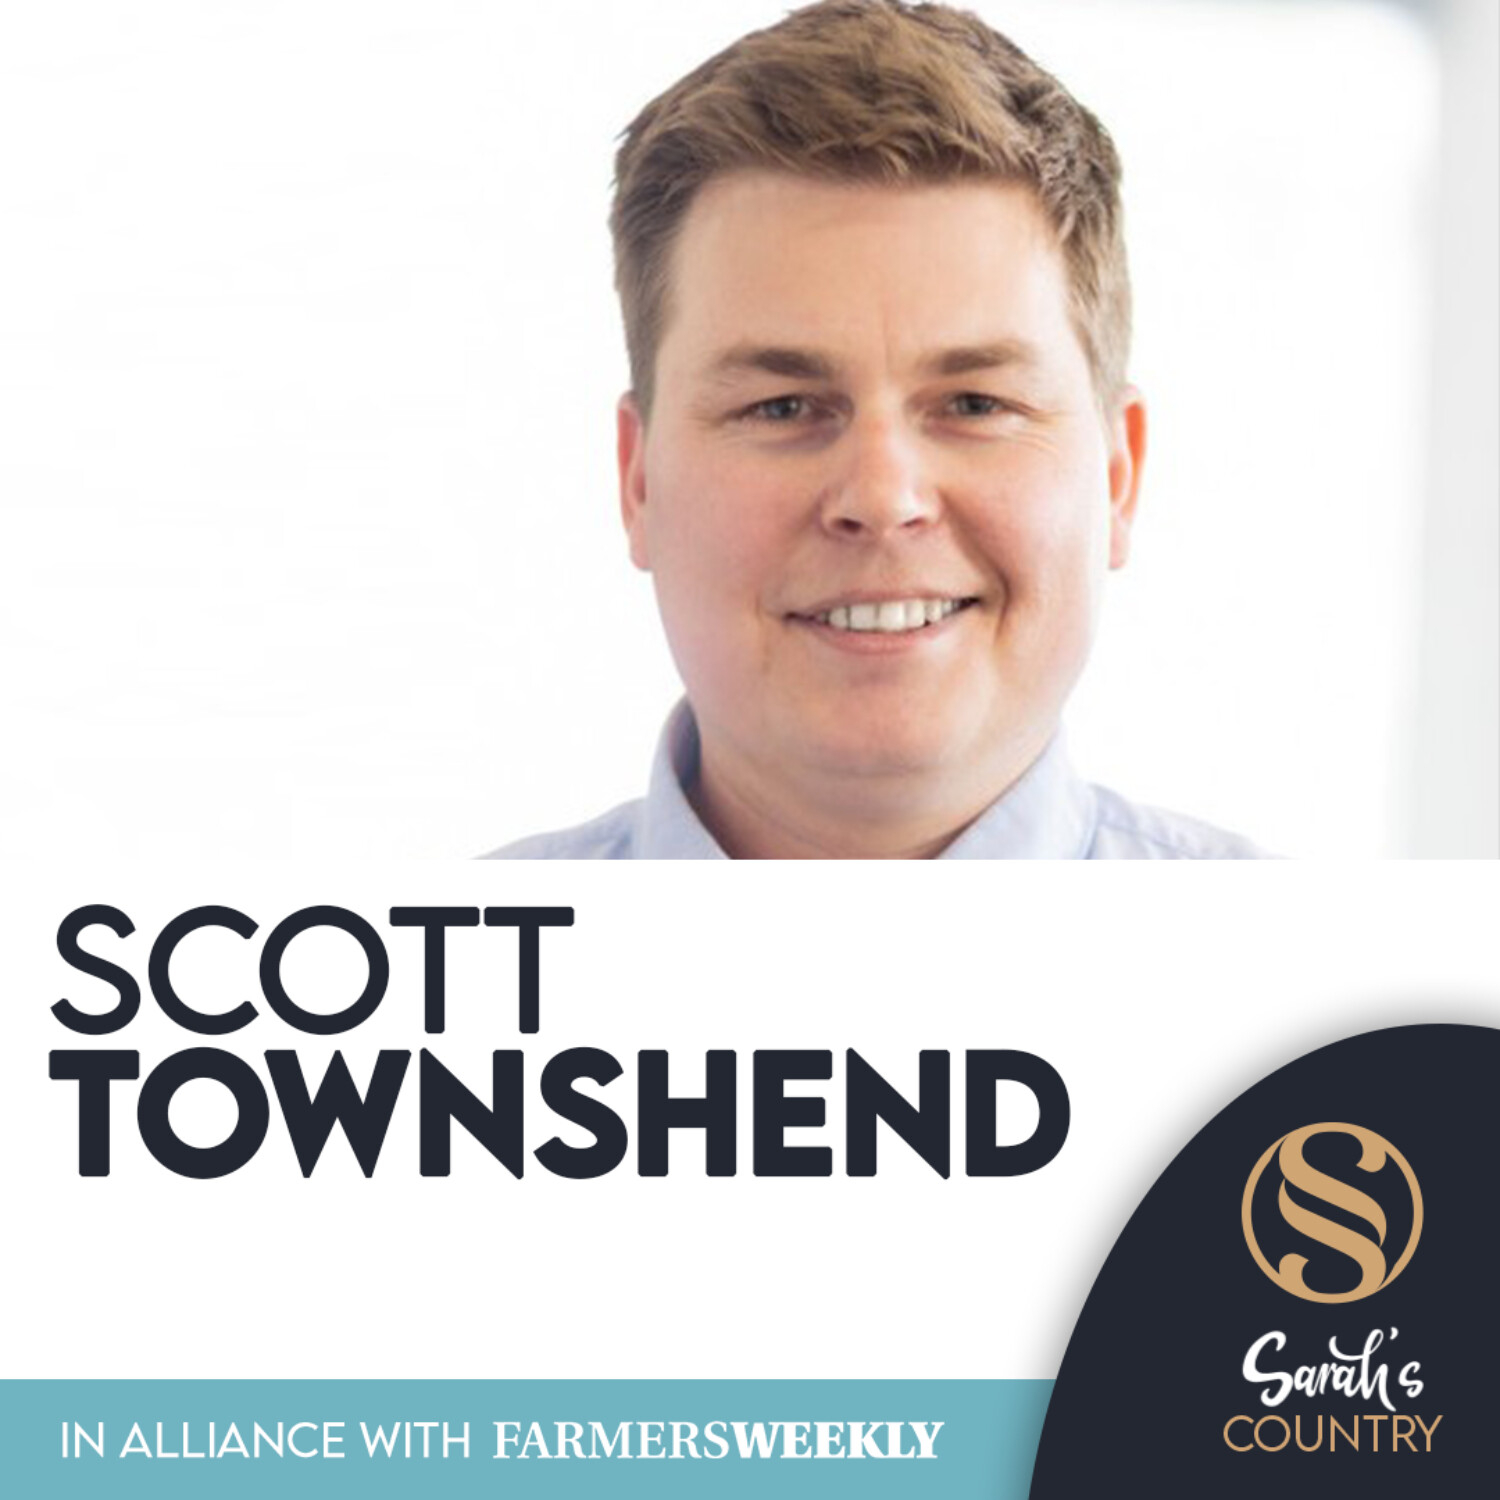 Scott Townshend | “Farm reporting software to help farmers build database”